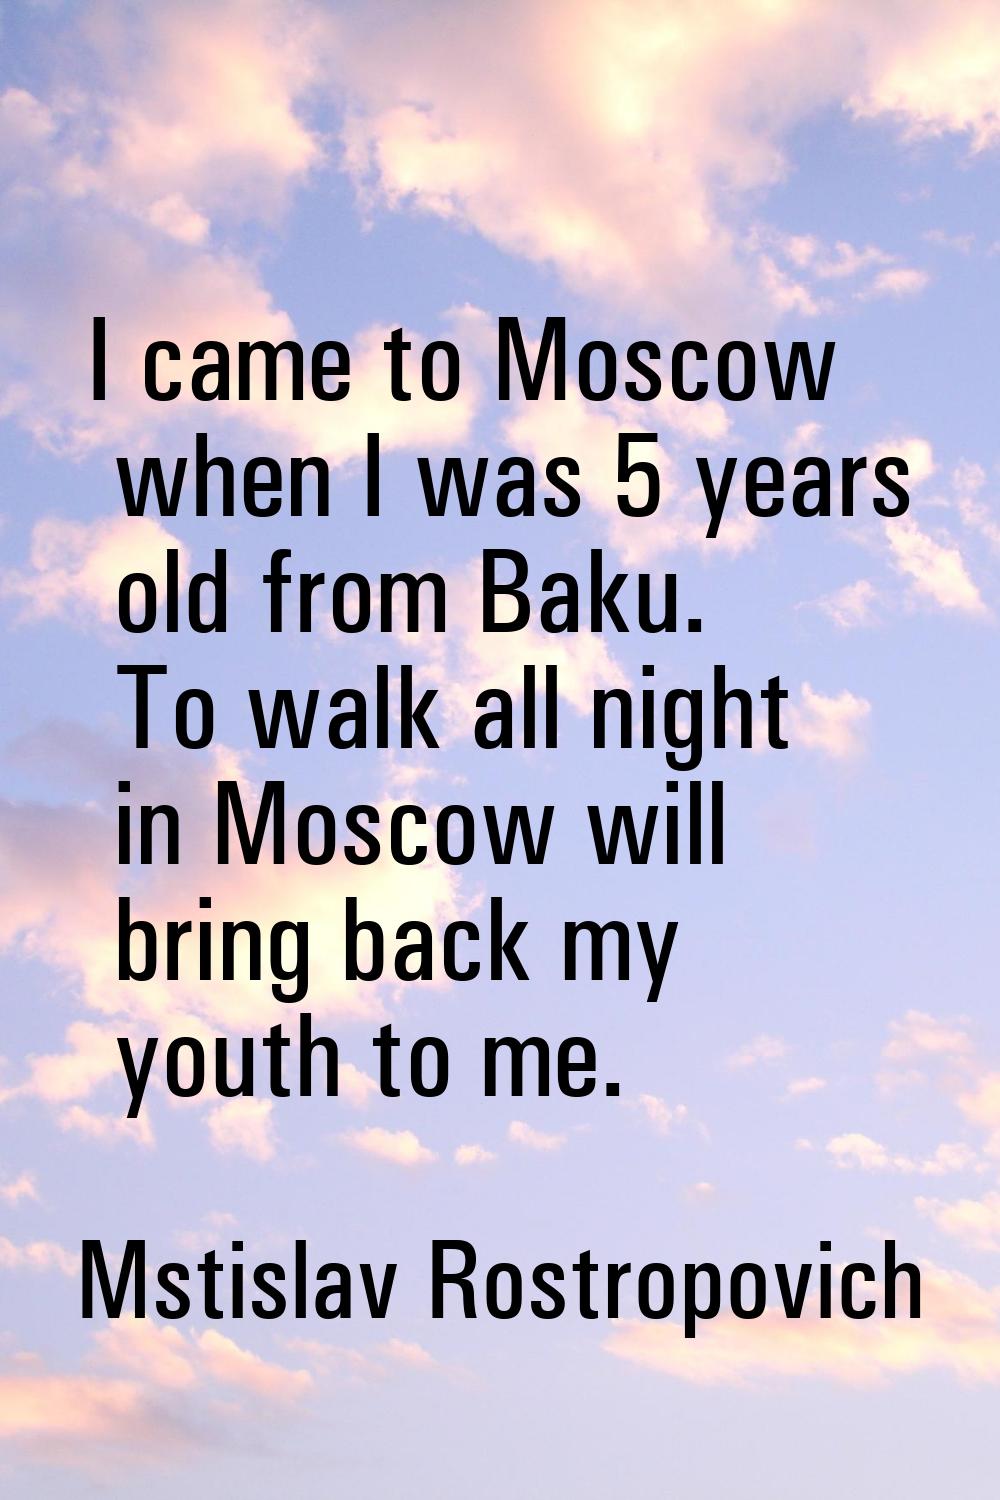 I came to Moscow when I was 5 years old from Baku. To walk all night in Moscow will bring back my y